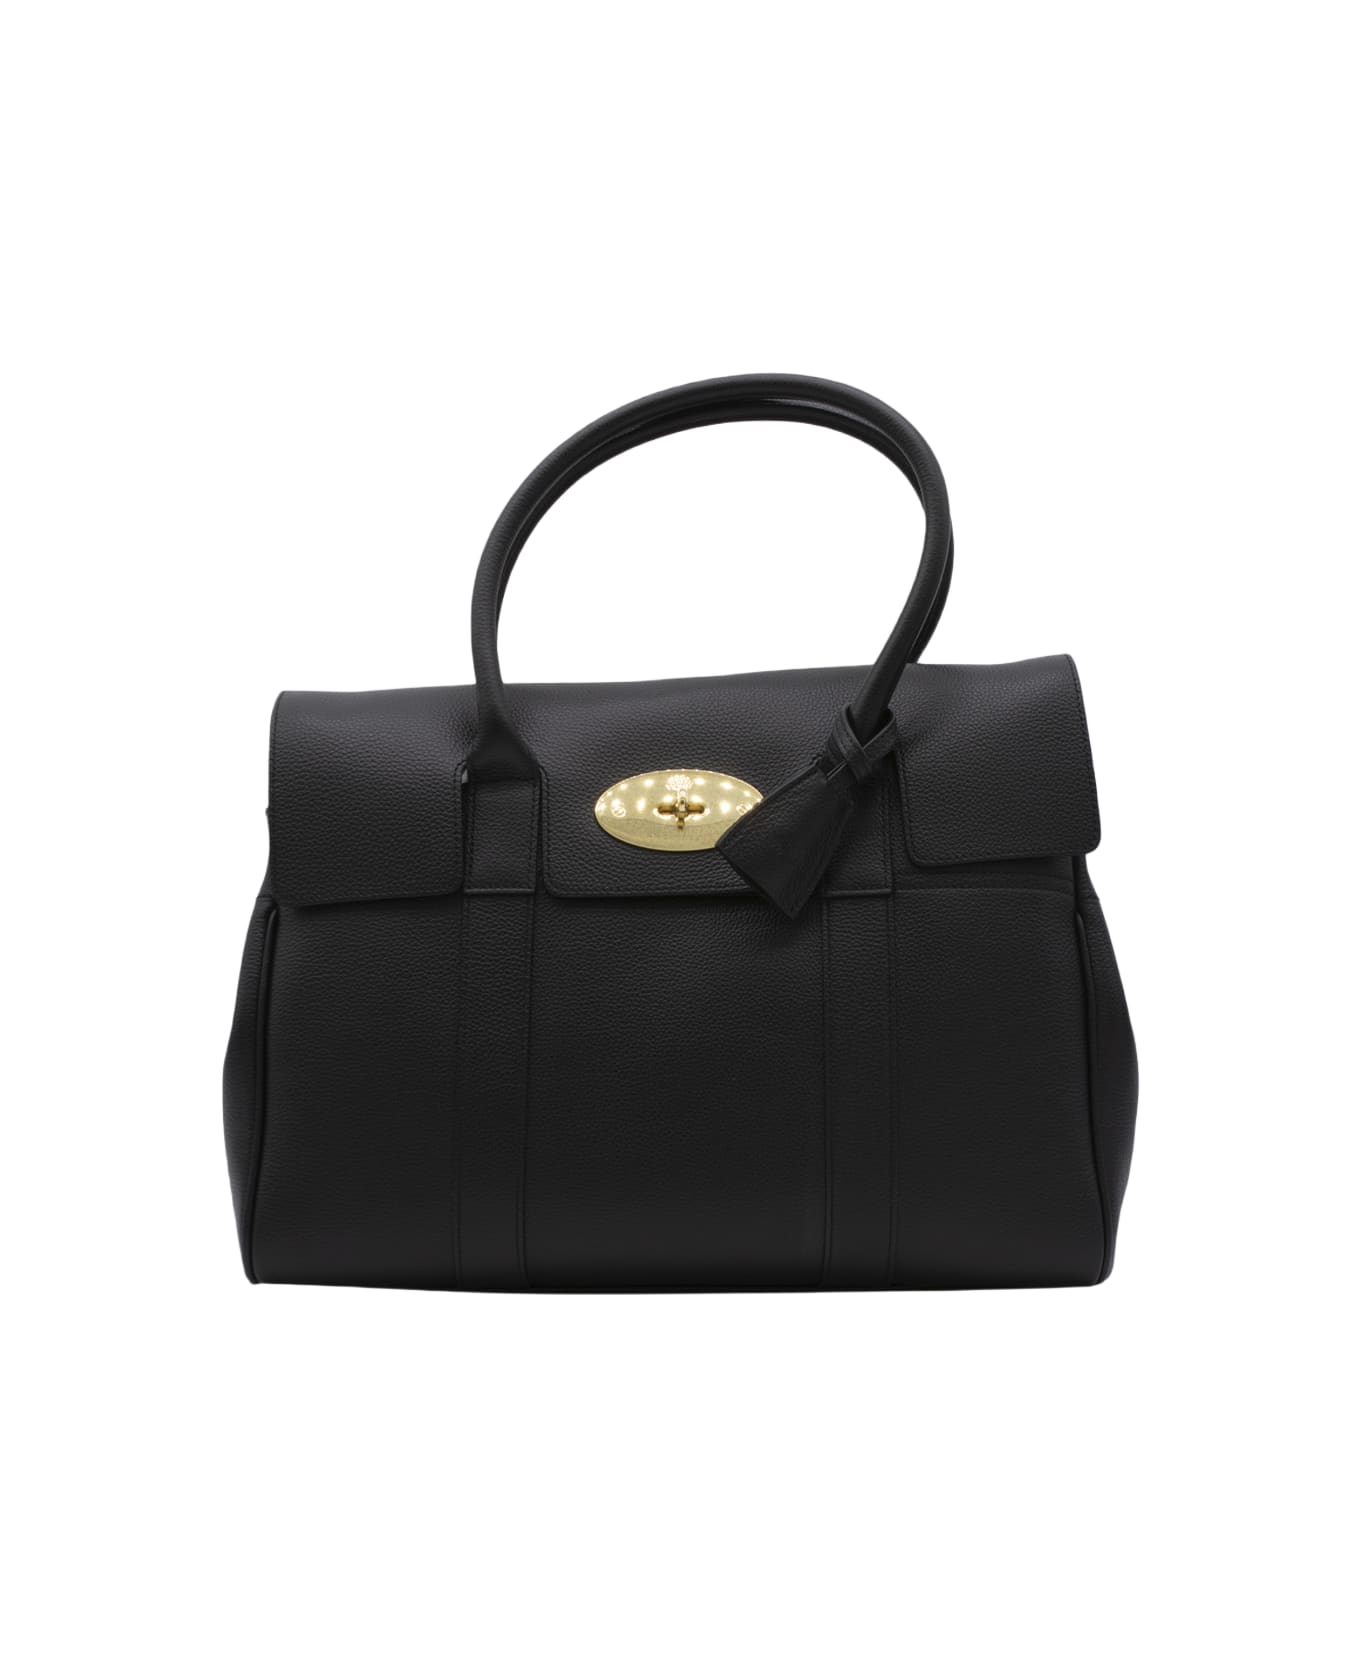 Mulberry Black Leather Bayswater Tote Bag - Black-Brass